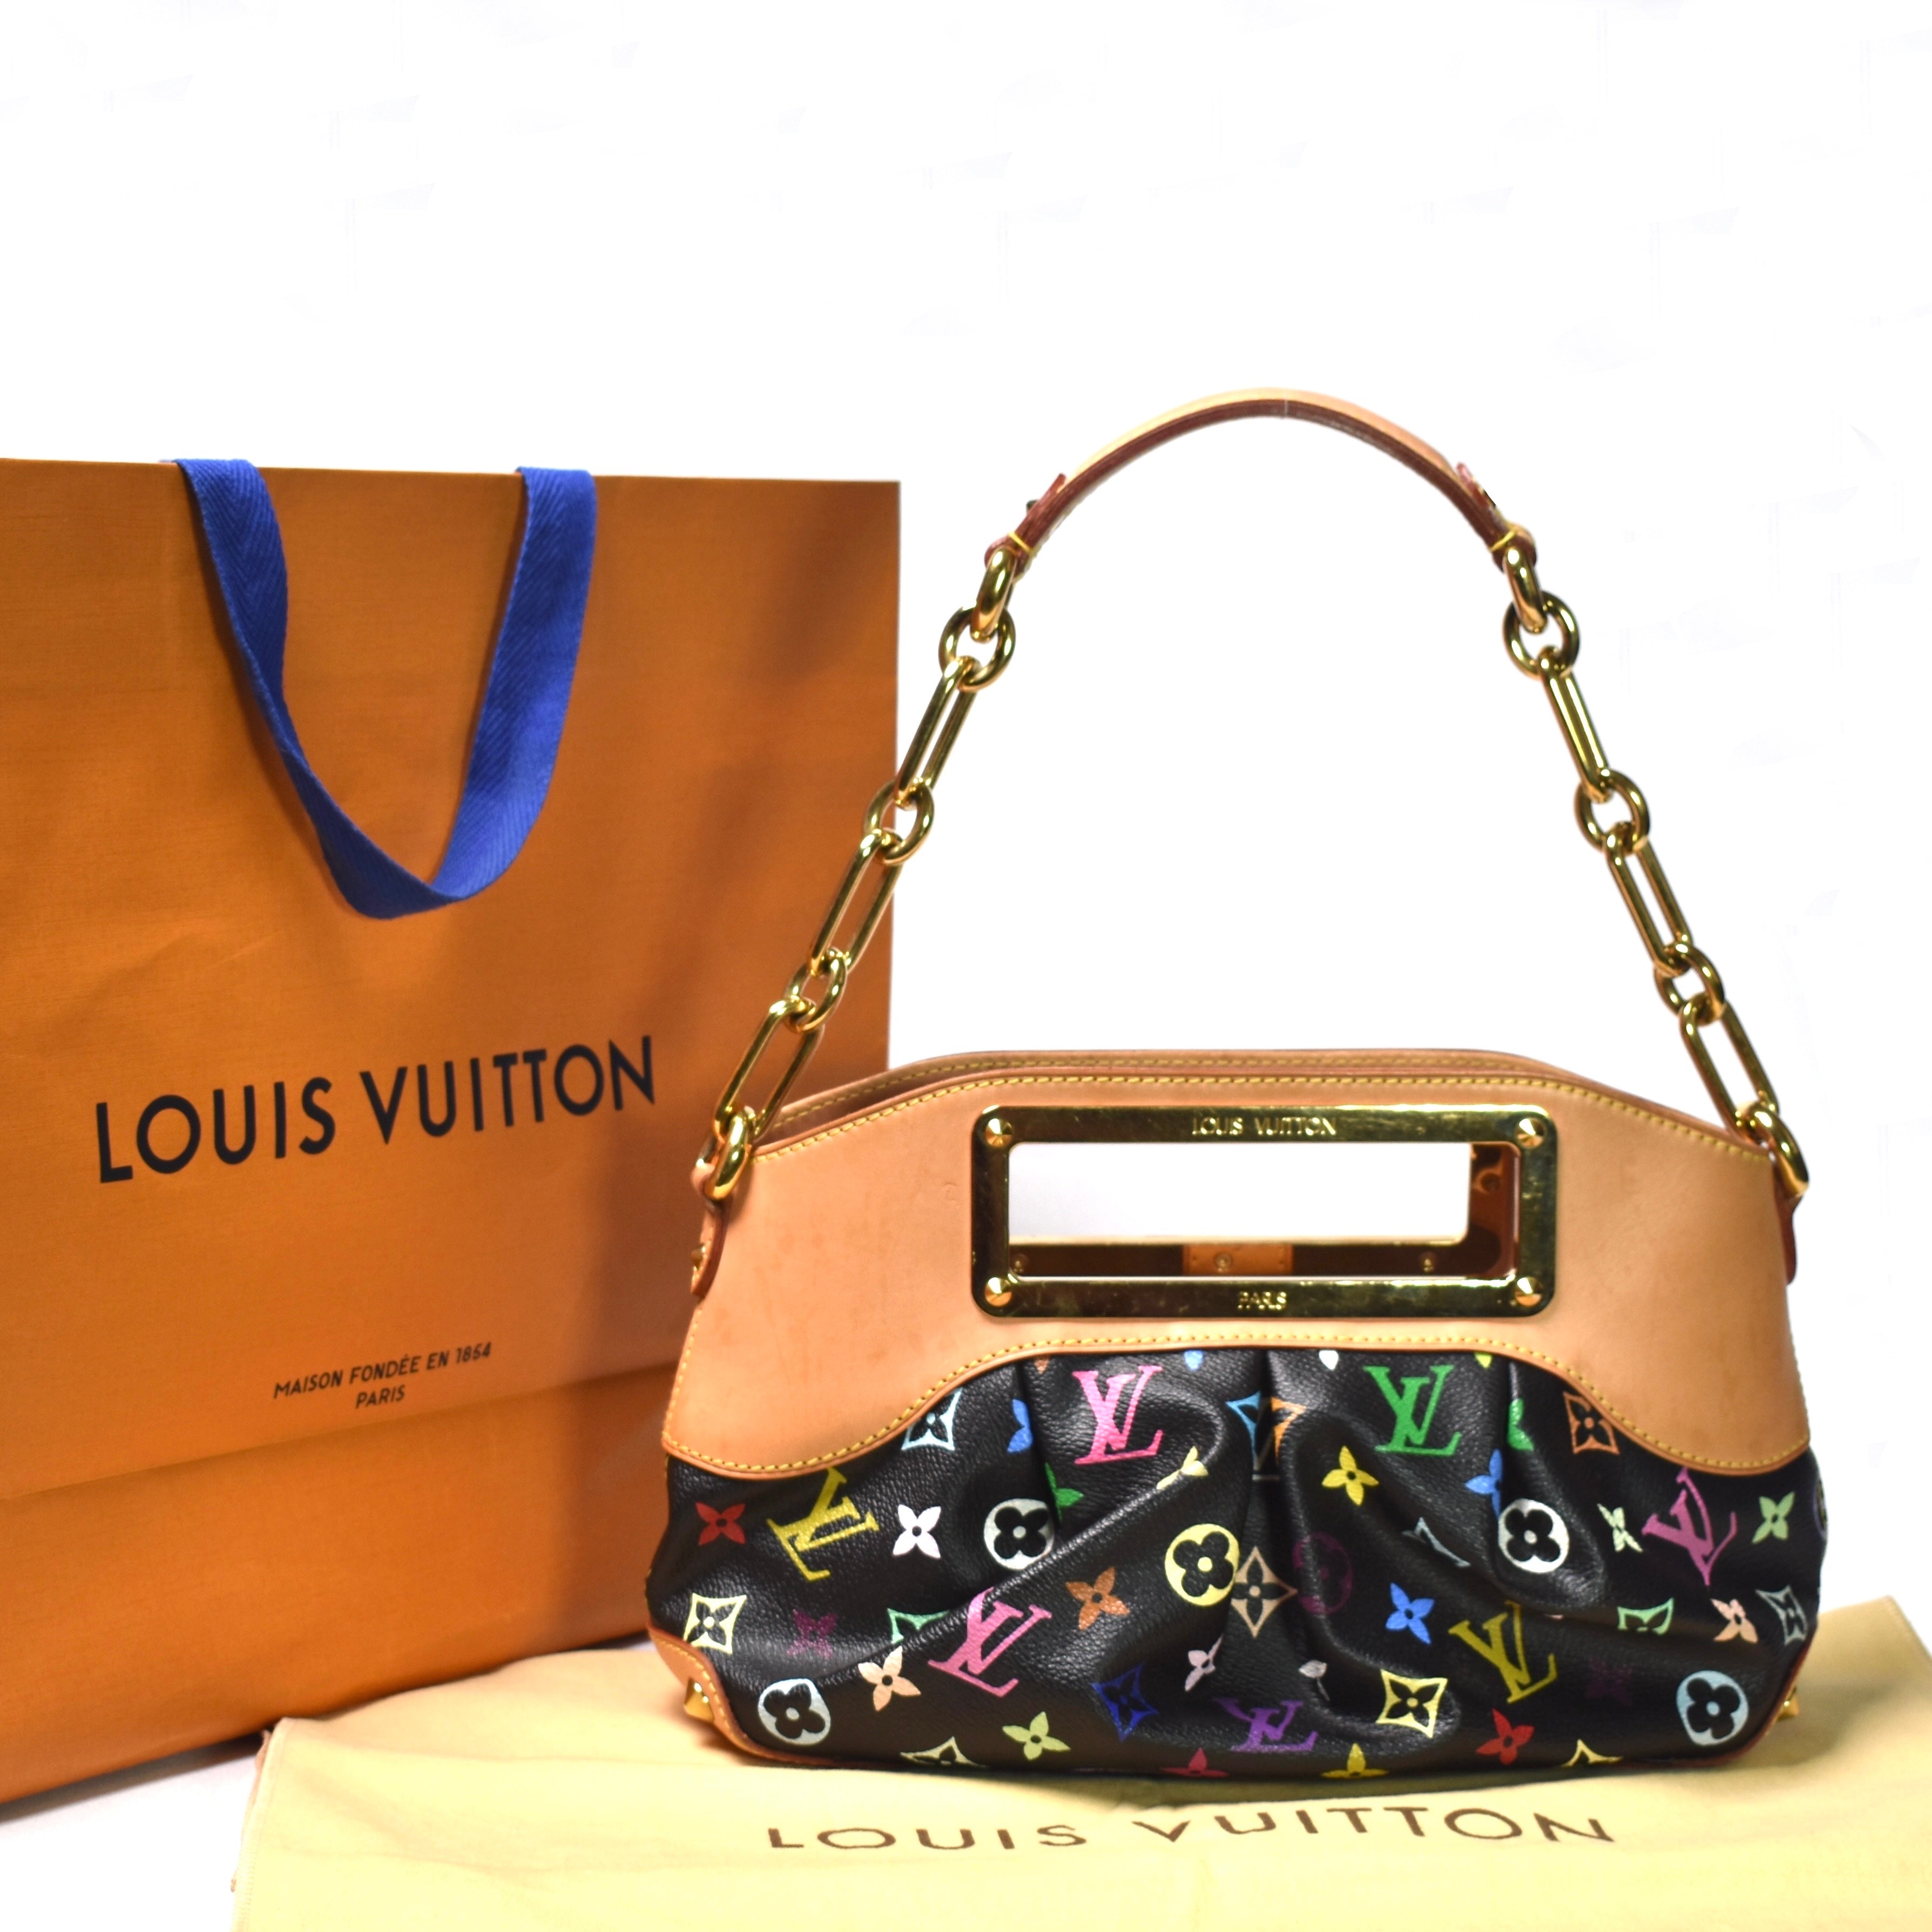 I BOUGHT A NEW LOUIS VUITTON BAG! DID I MAKE A MISTAKE?! Multicolor Judy PM  